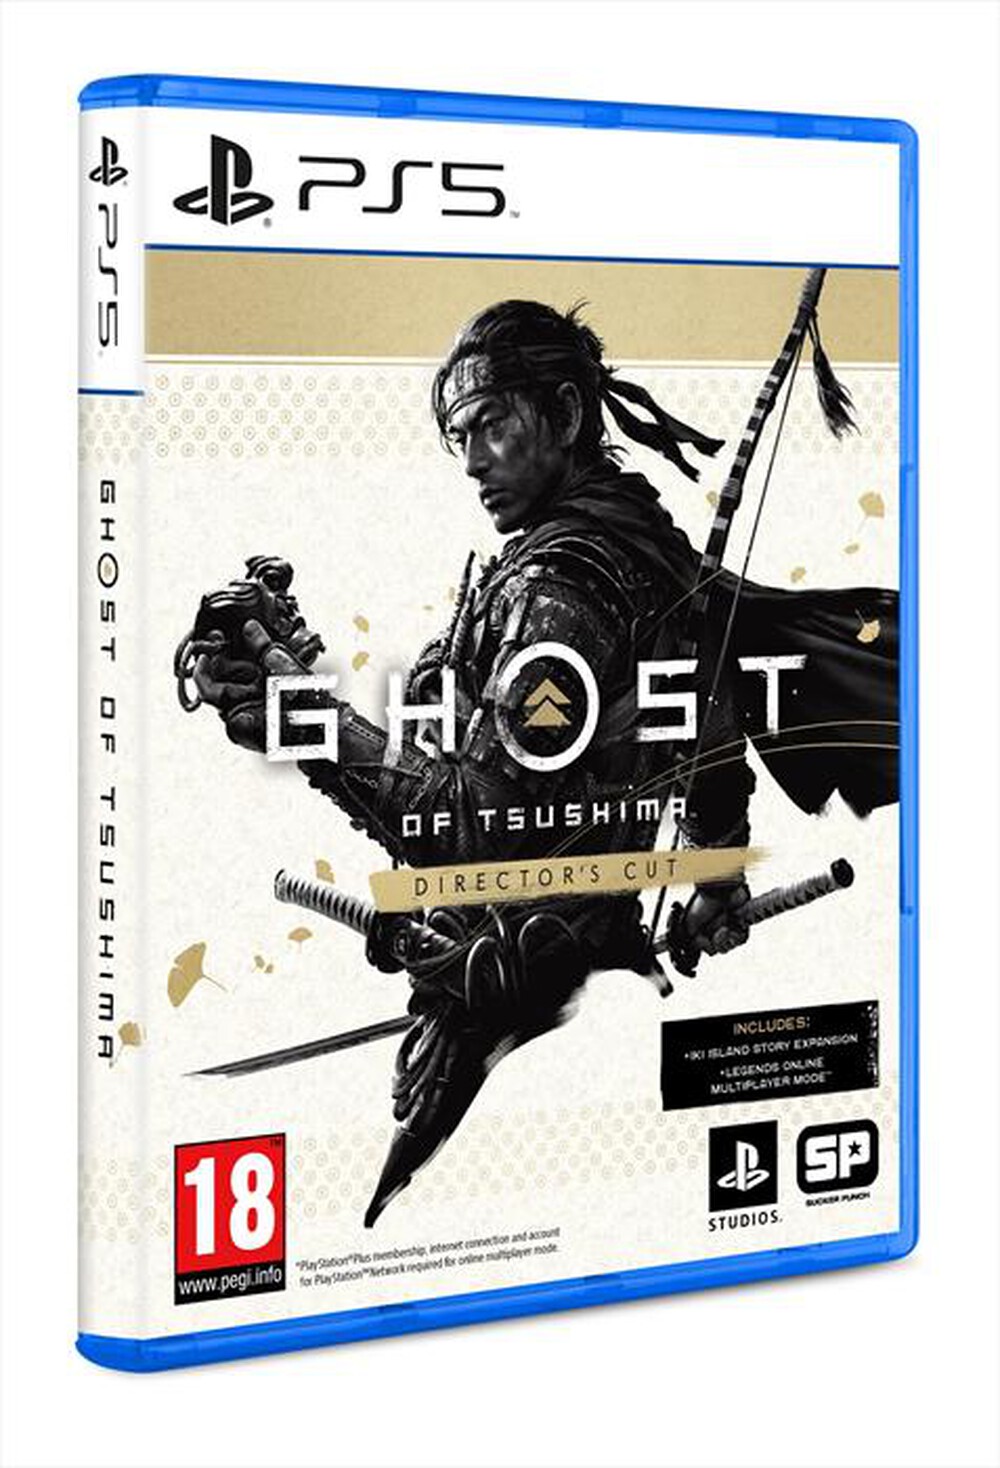 "SONY COMPUTER - GHOST OF TSUSHIMA DIRECTOR’S CUT PS5"